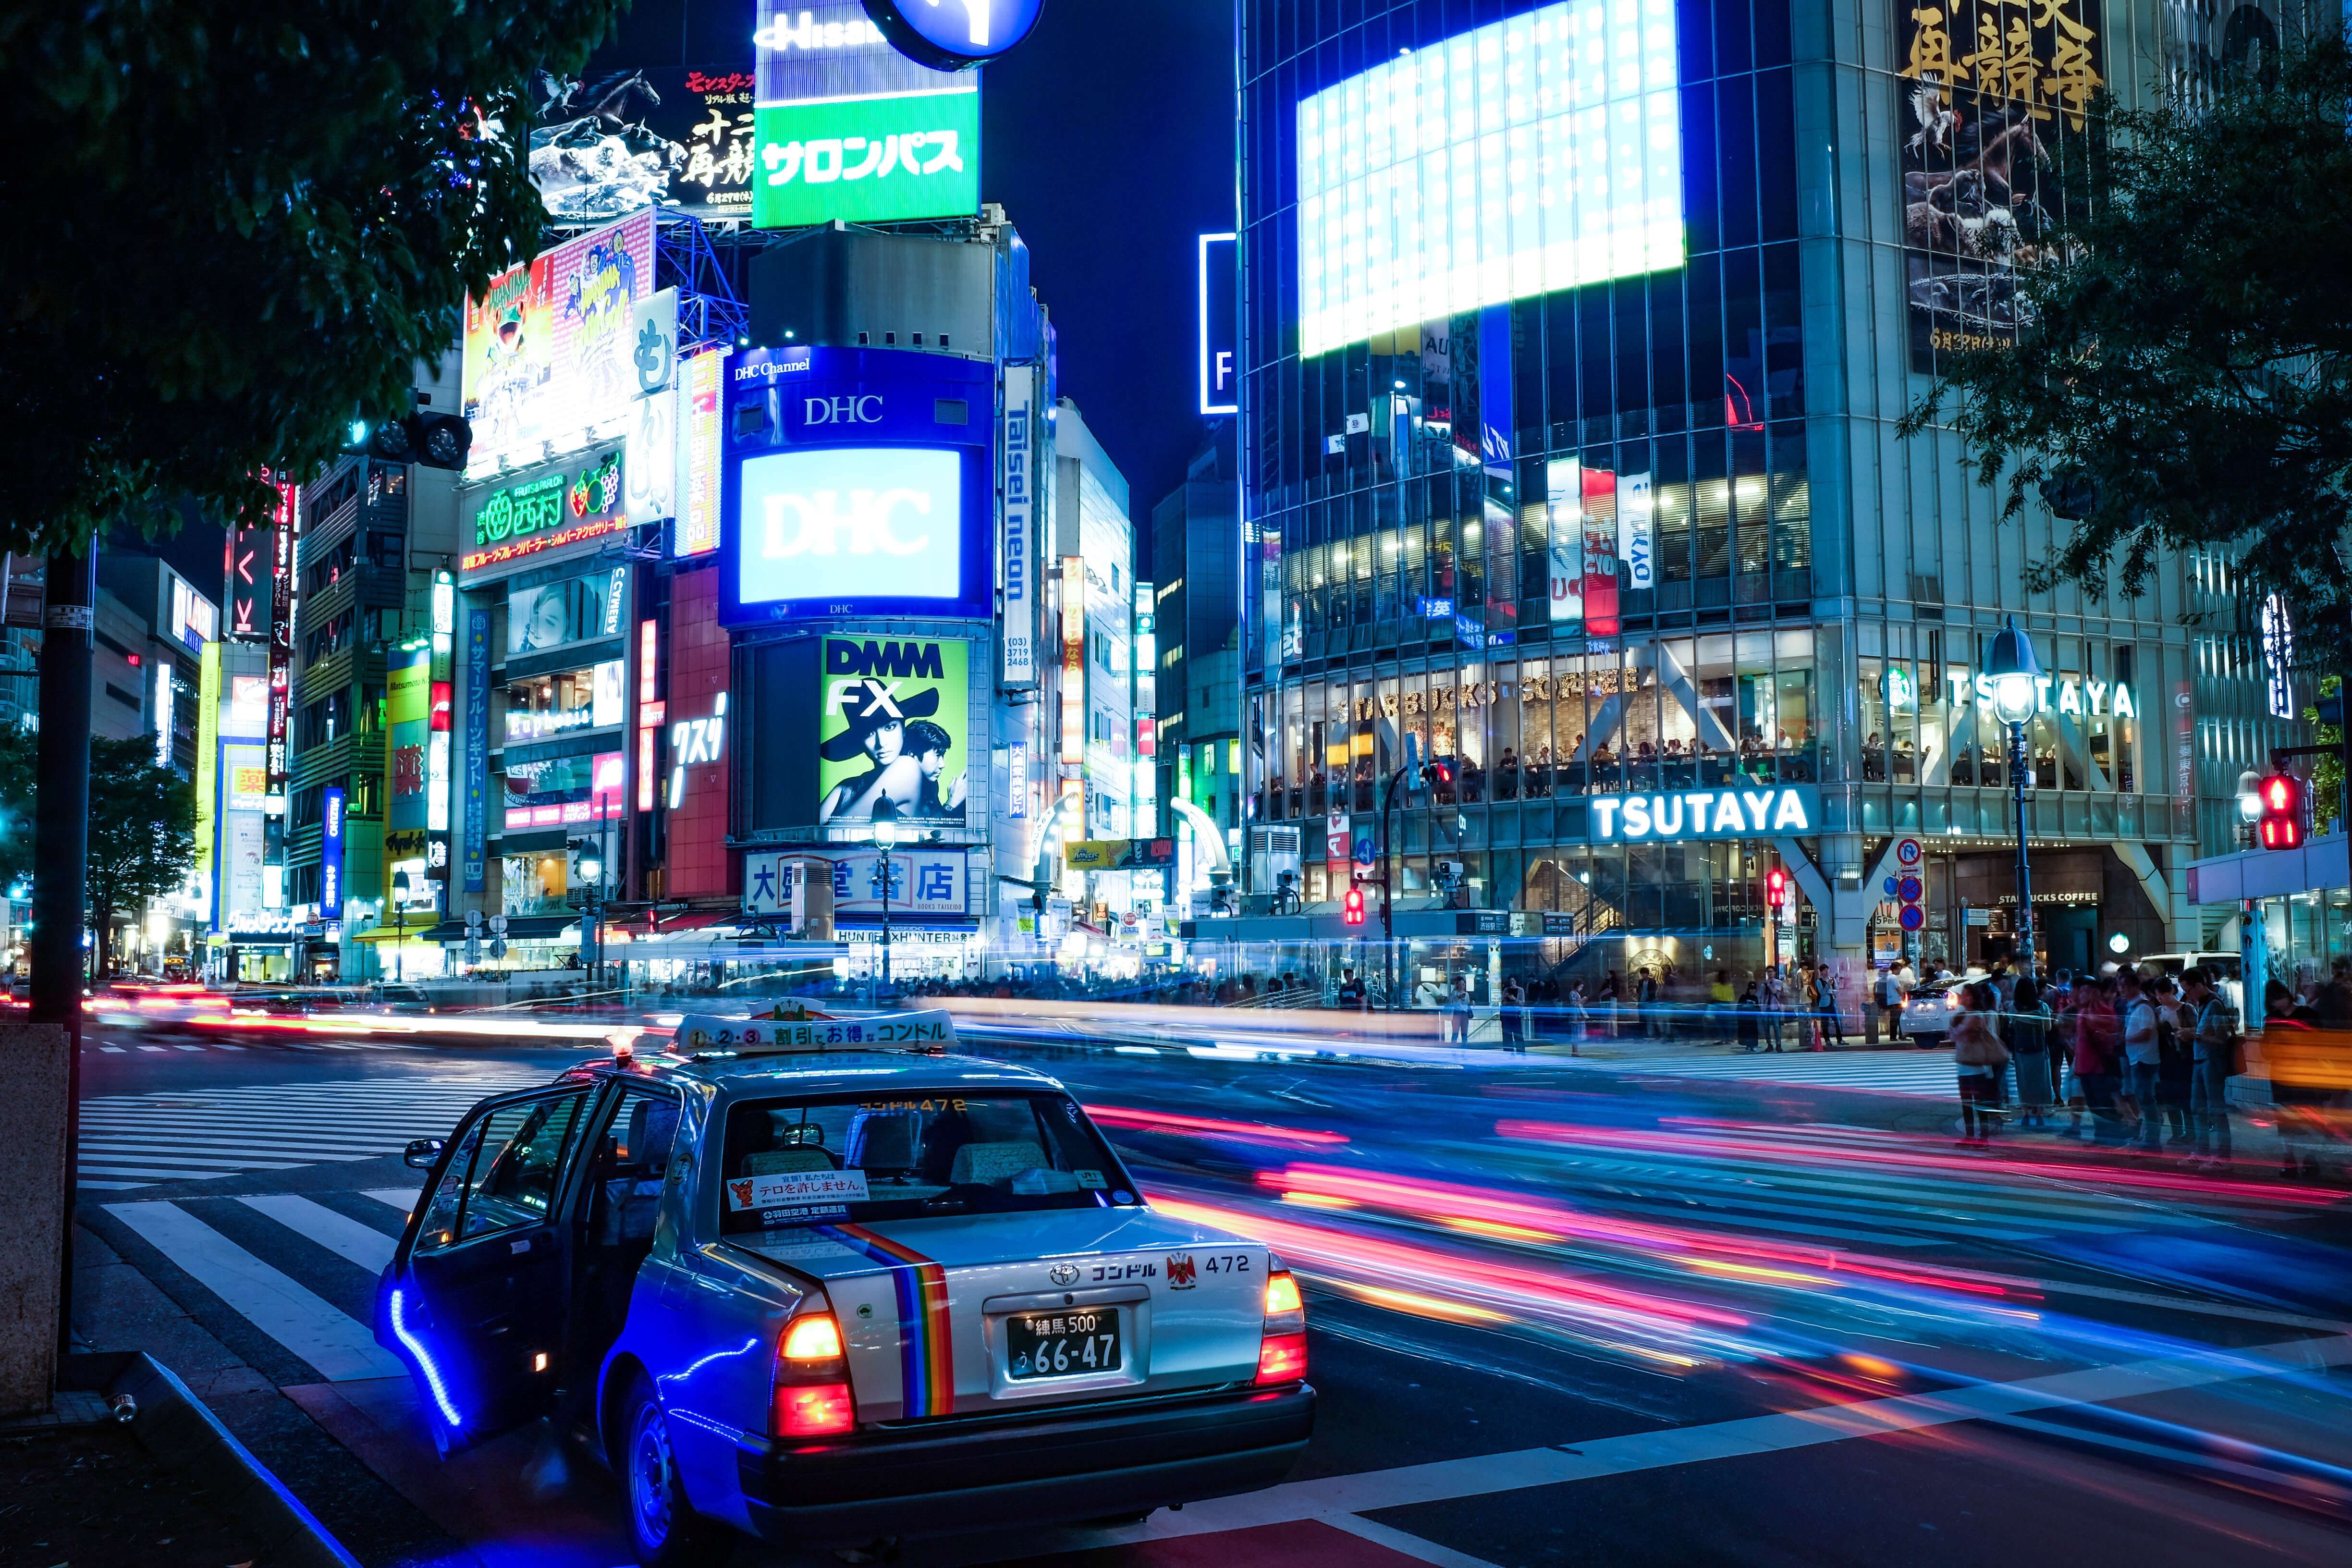 Taxi and colorful lights at night in Tokyo, Japan